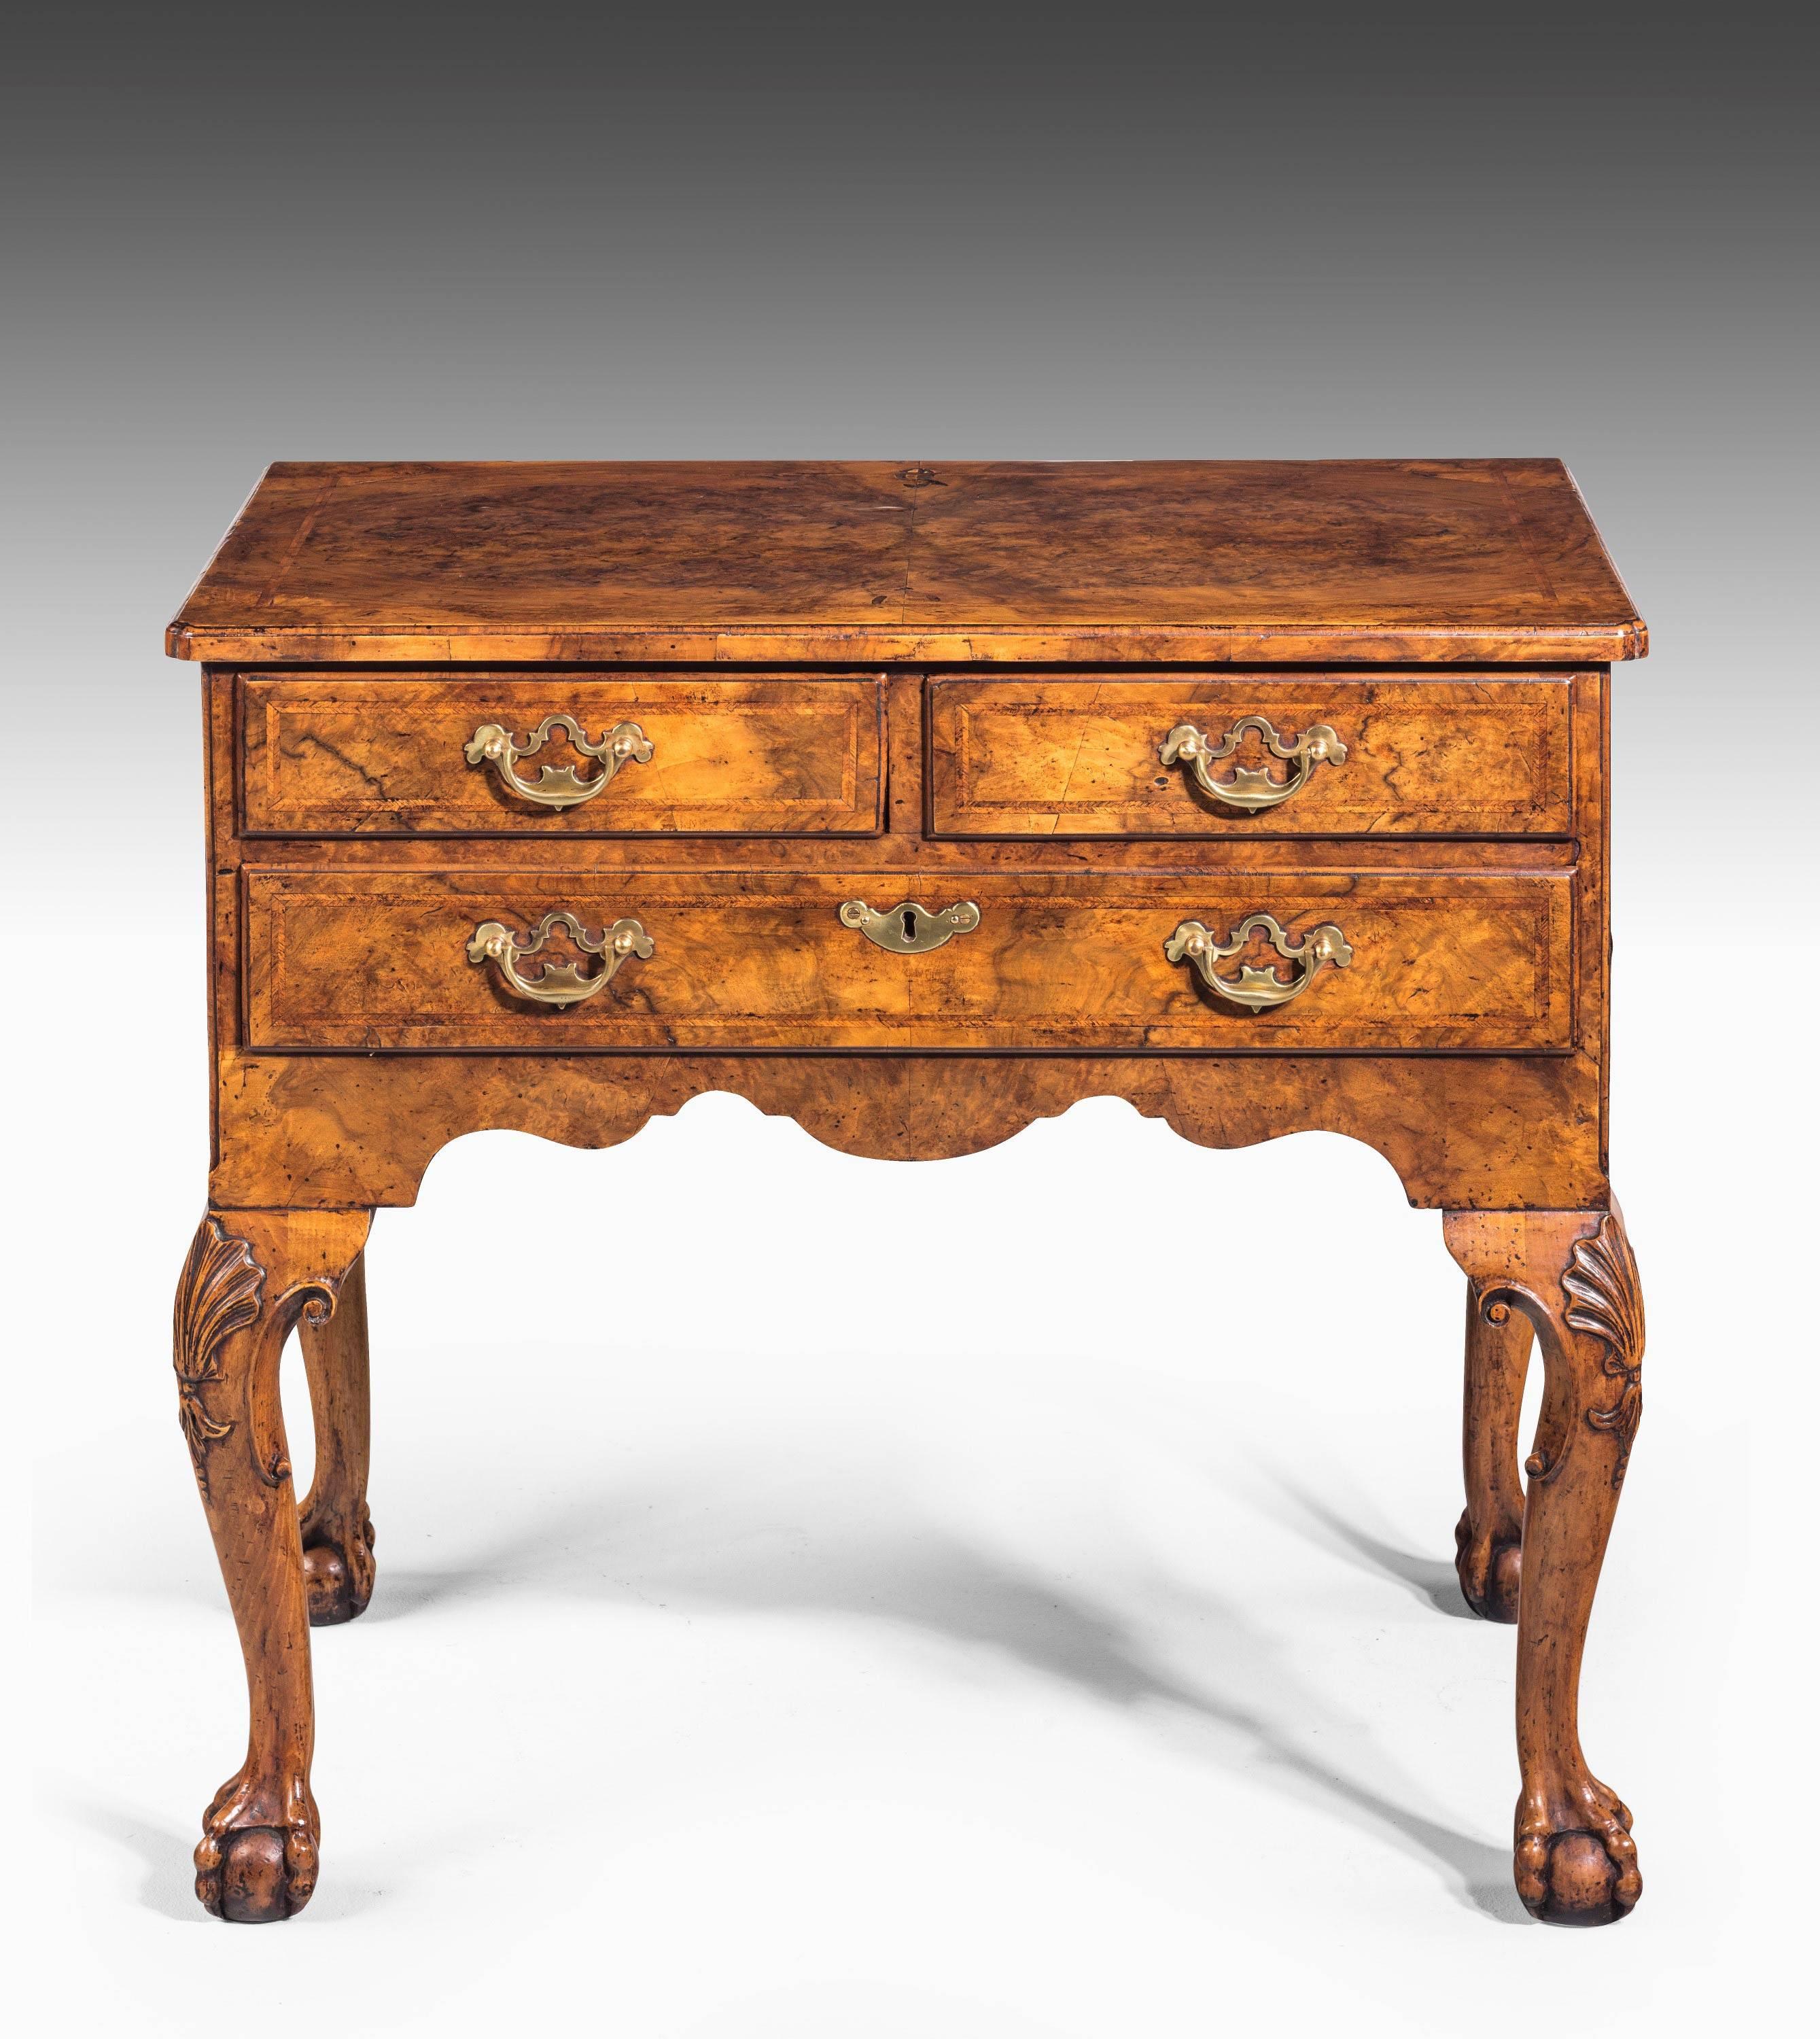 A near pair of George I period beautifully figured walnut lowboys. Well carved cabriole supports terminating in claw and ball feet. The knees with elaborate fans. Herringbone inlay on all sides.